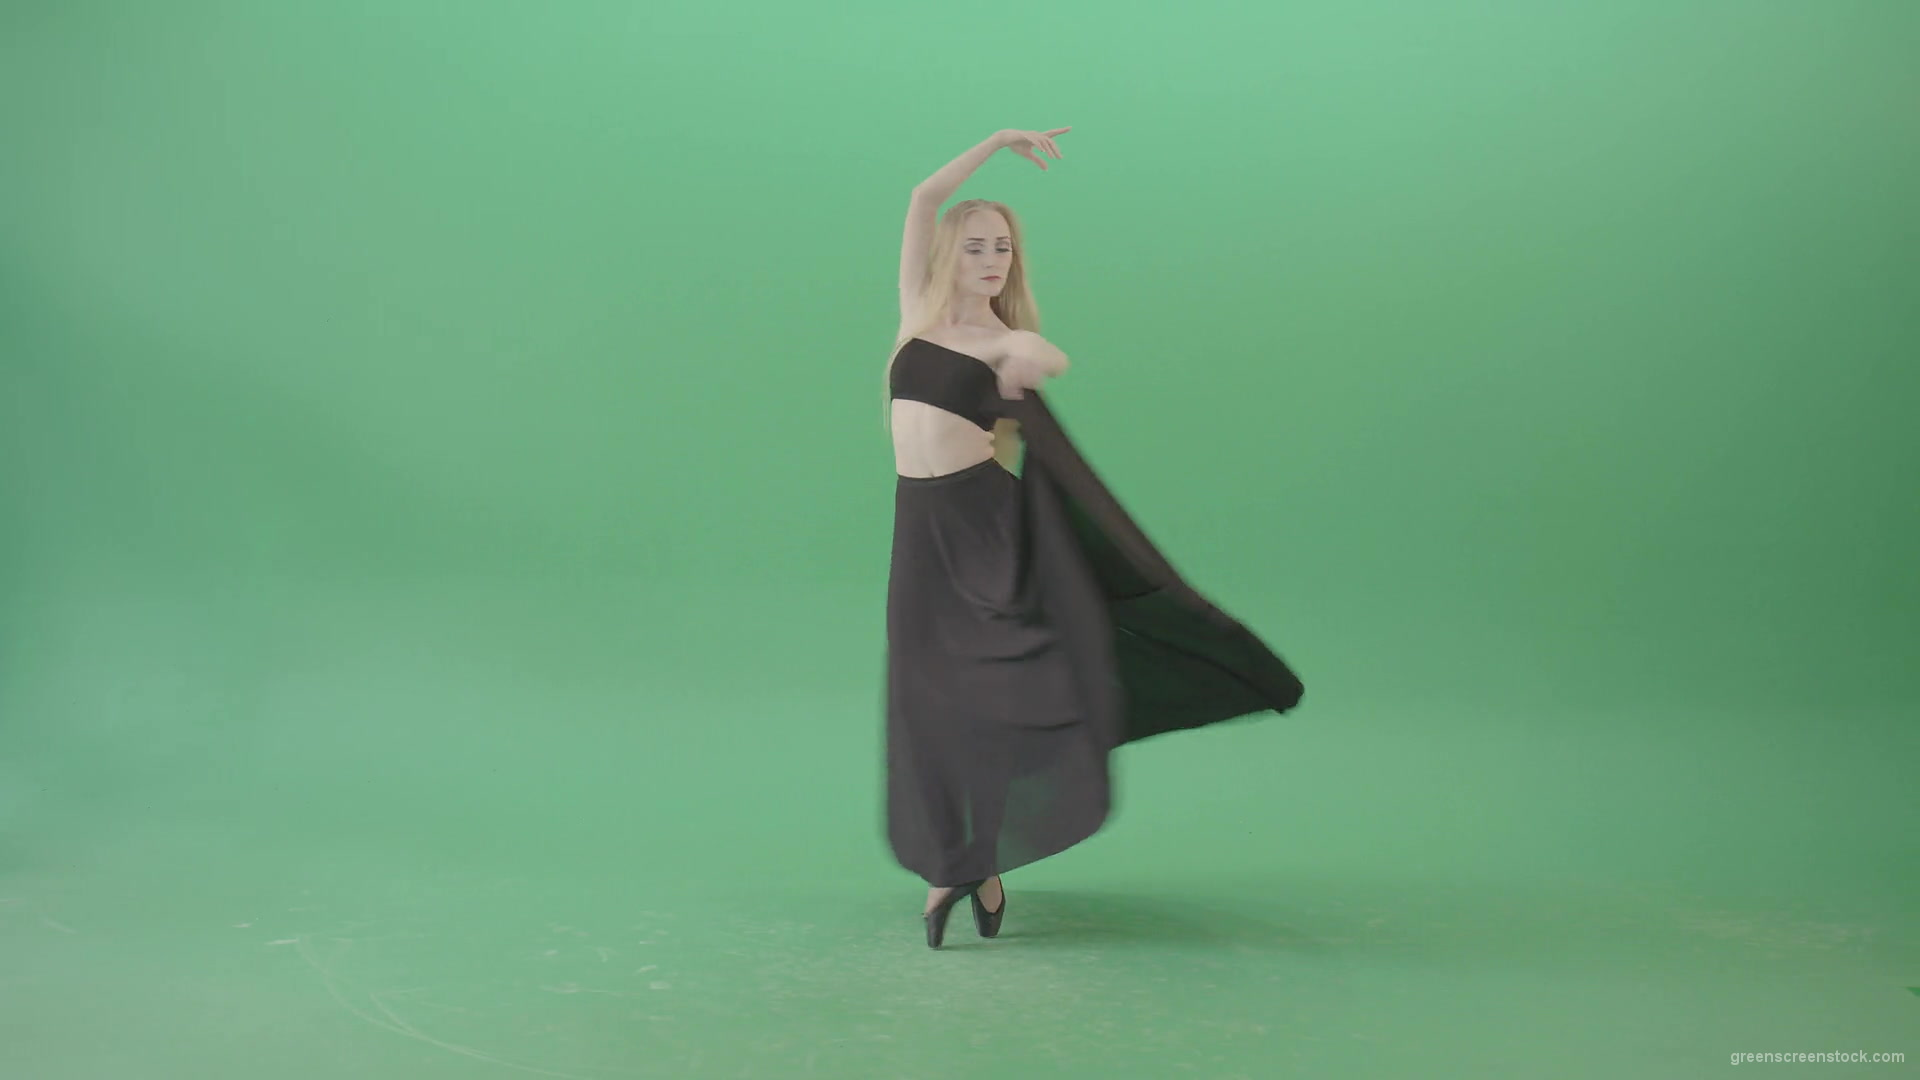 Spinning-isolated-on-green-screen-ballet-young-woman-ballerin-in-black-costume-4K-Video-Footage-1920_006 Green Screen Stock